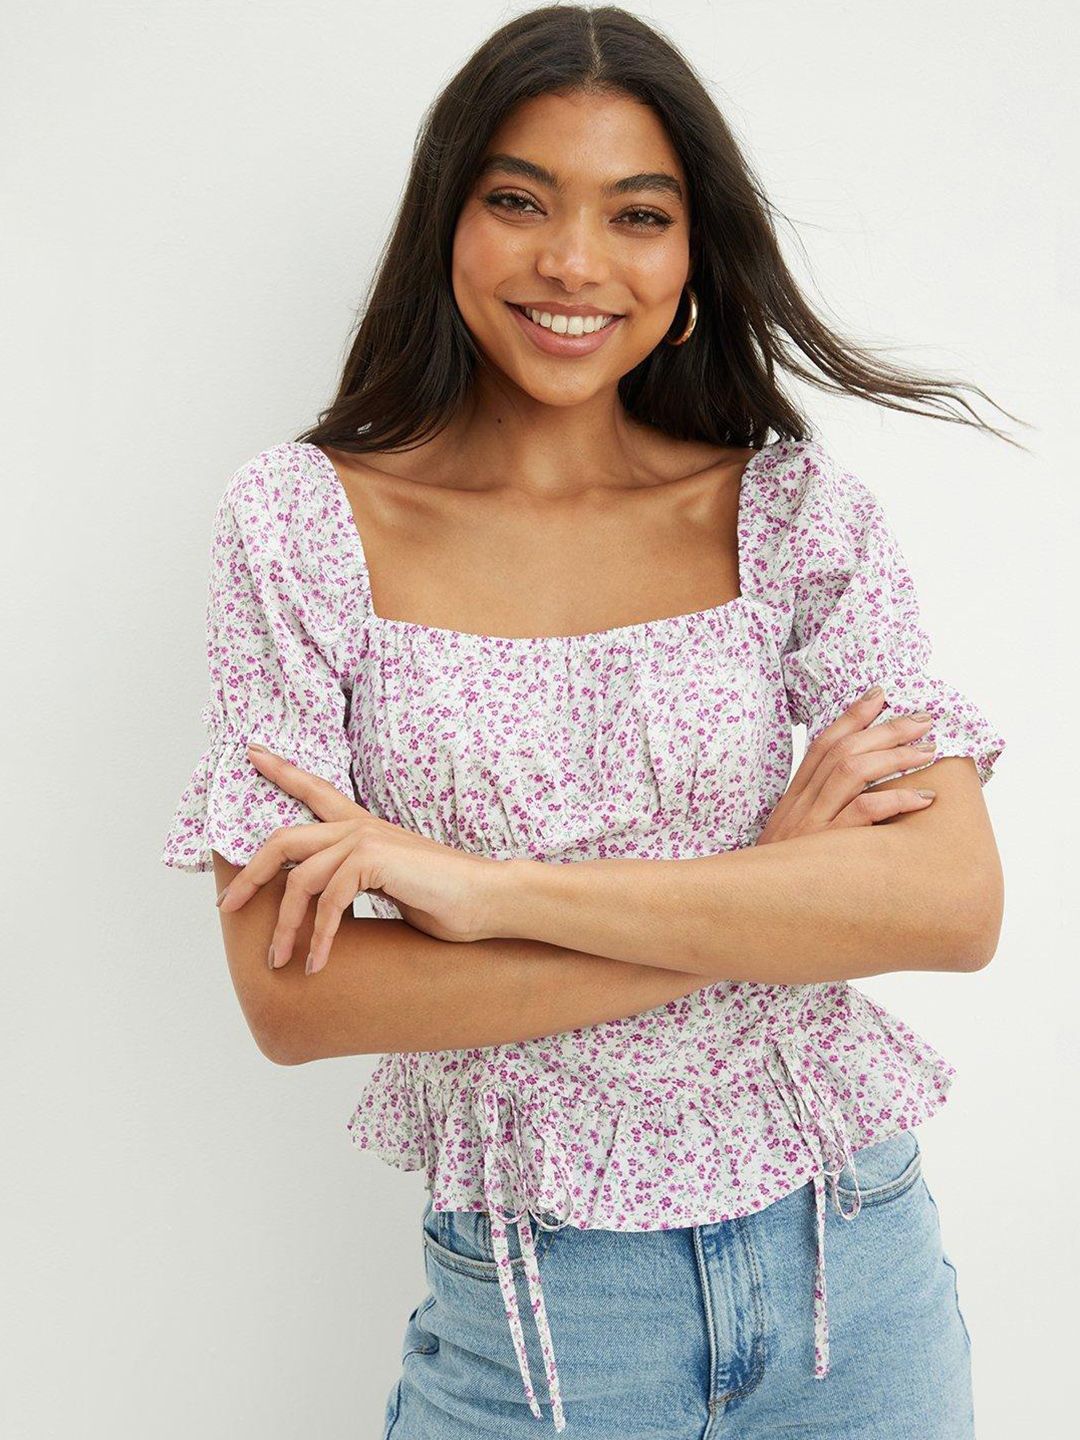 DOROTHY PERKINS Off White & Purple Floral Print Ruched Front Peplum Top Price in India